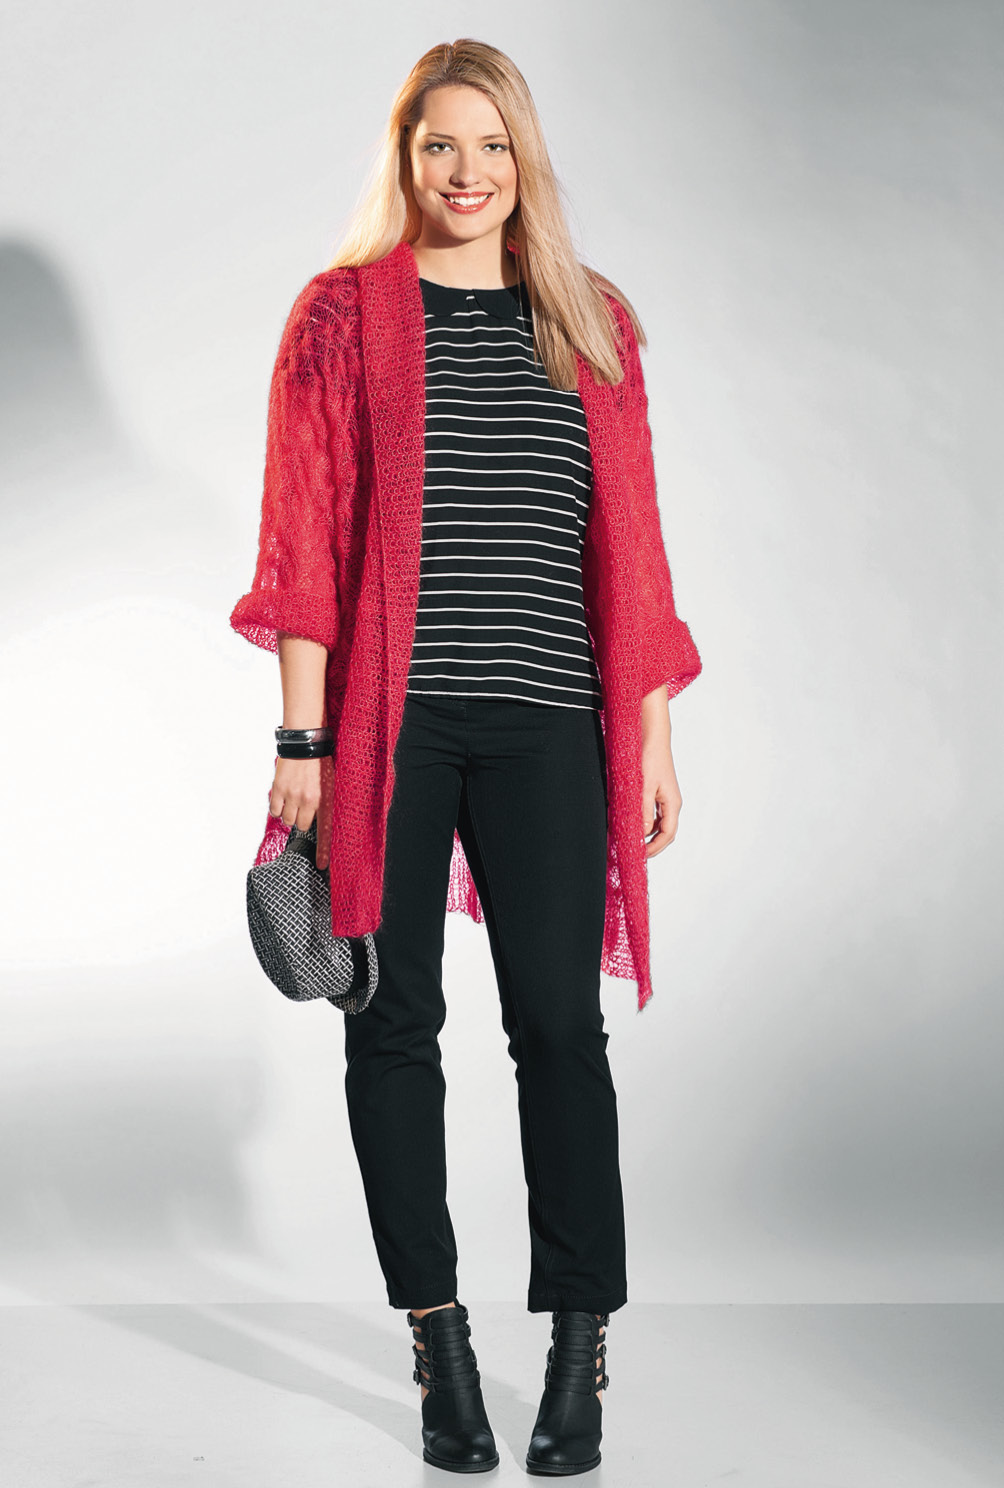 Quer getrickte rote Mohairjacke mit Zopfmuster